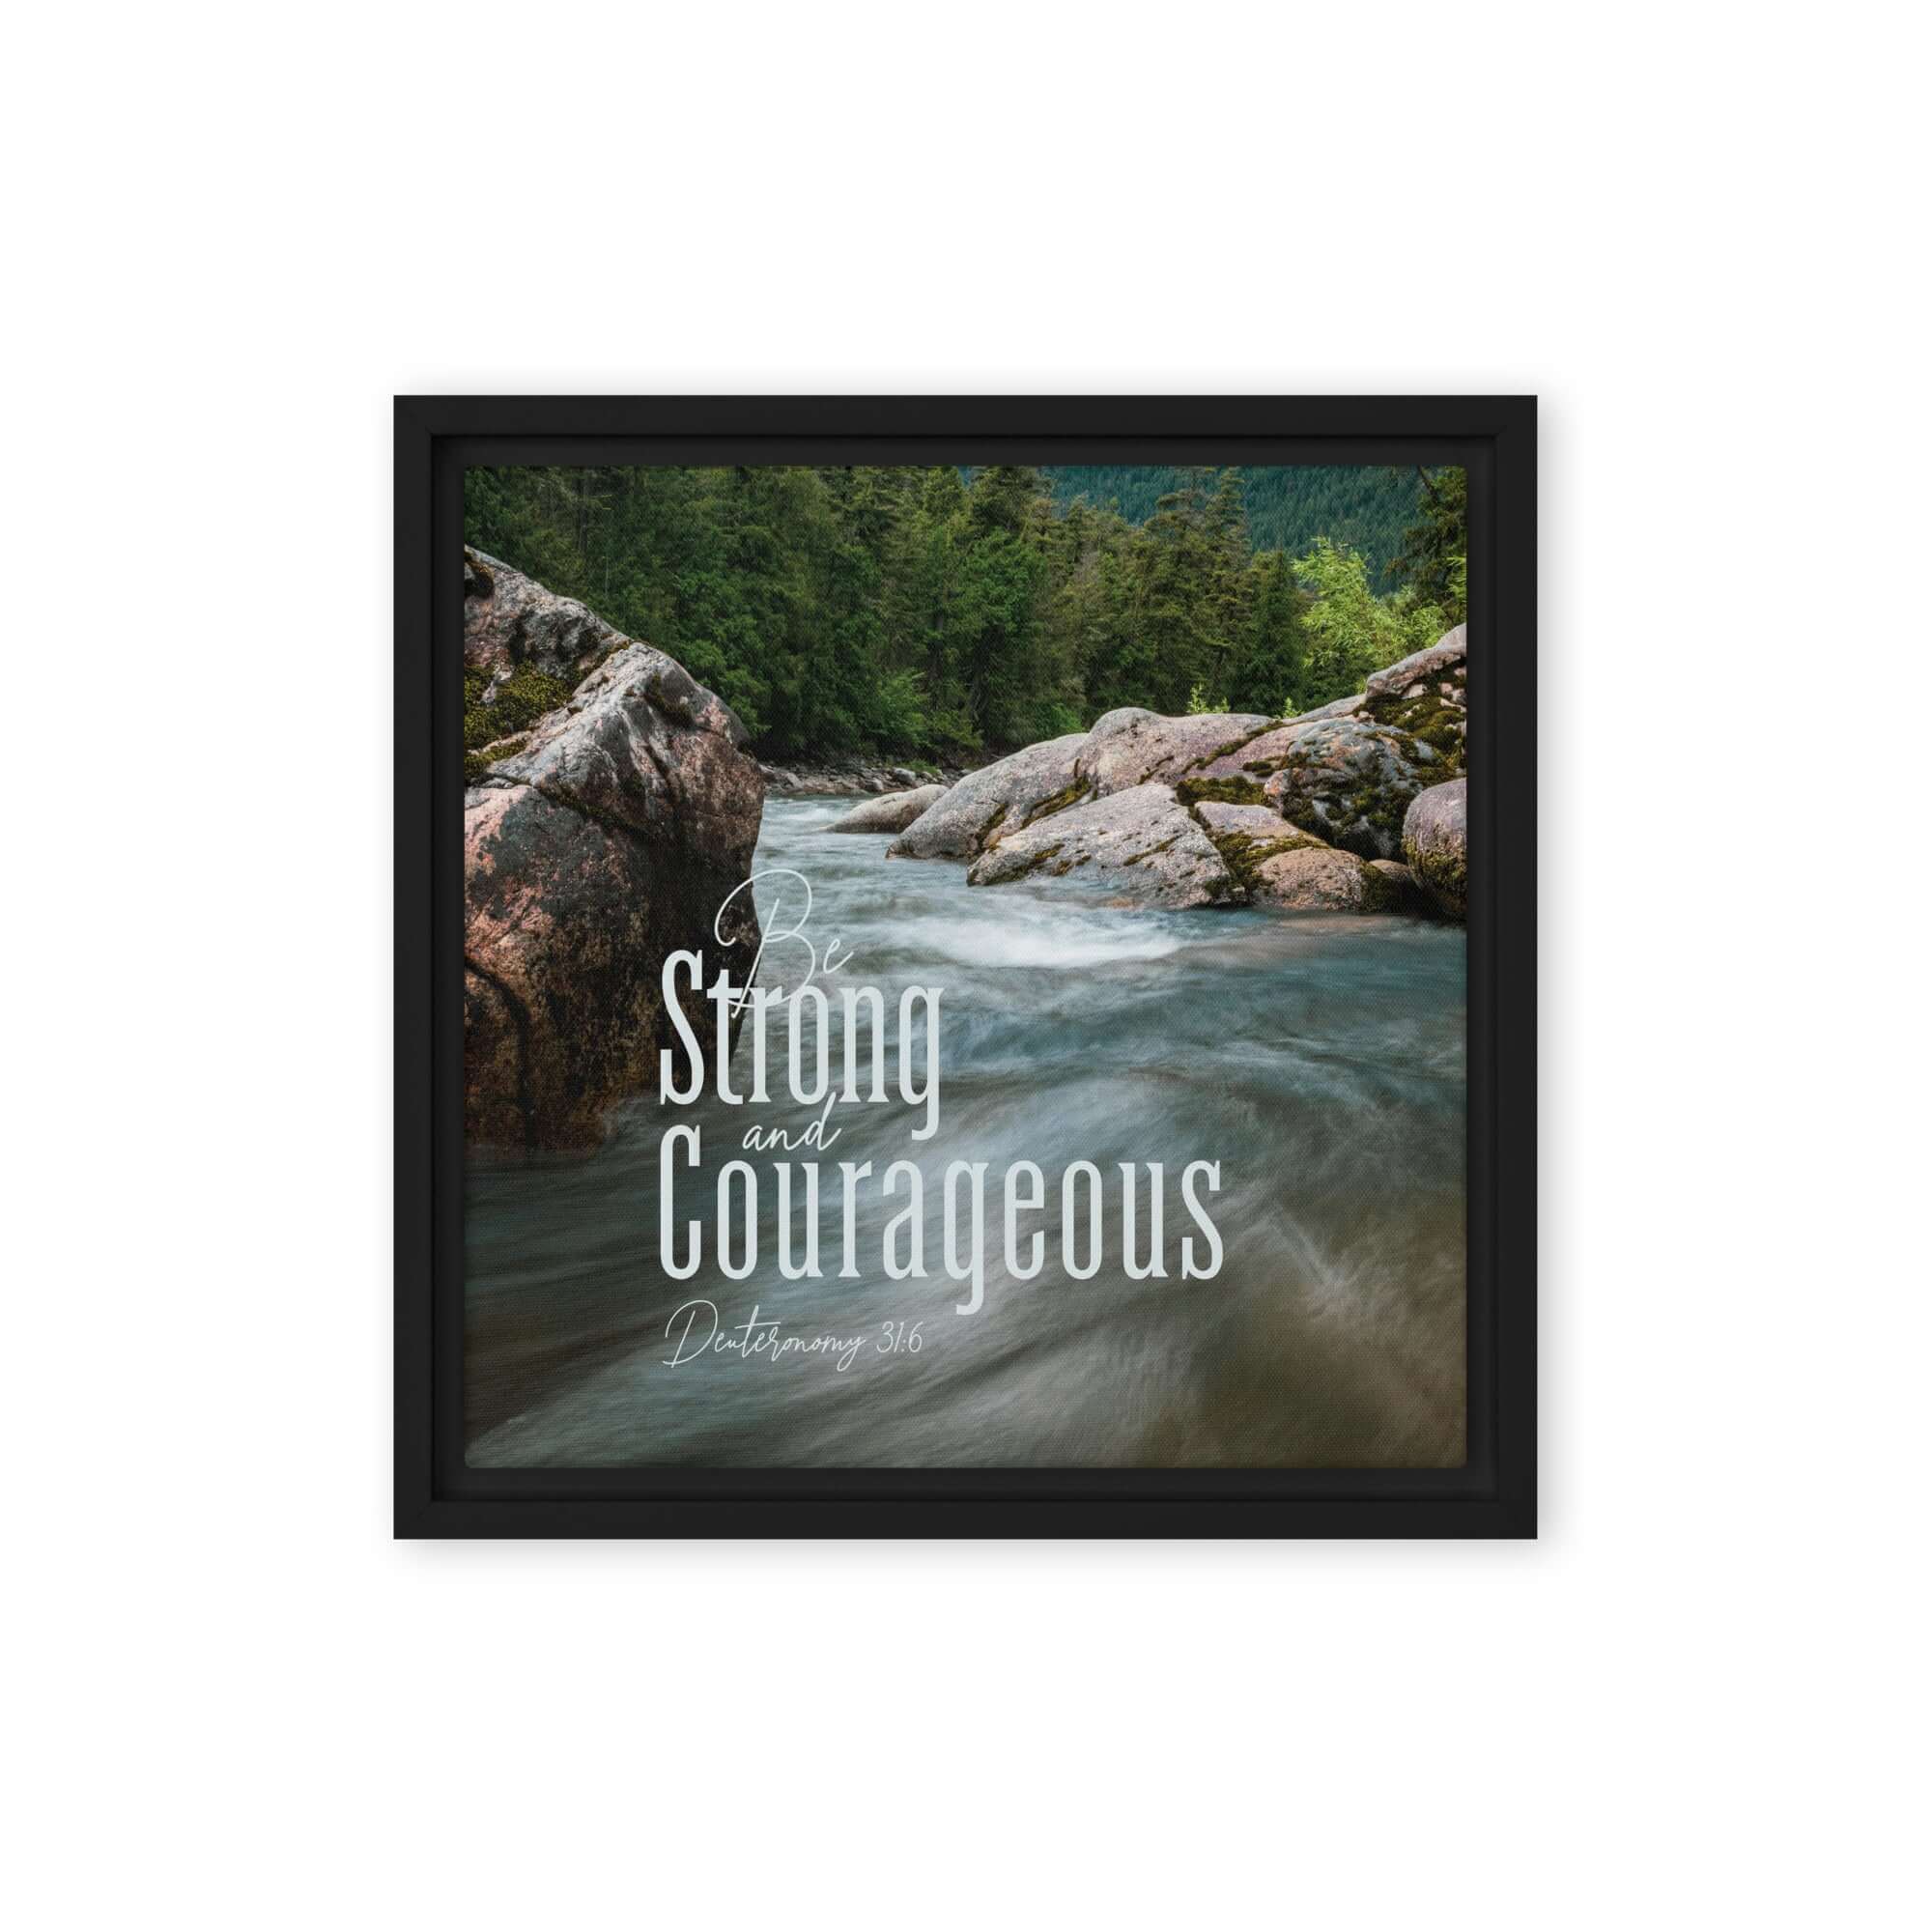 Deut 31:6 - Bible Verse, Be strong and courageous Framed Canvas